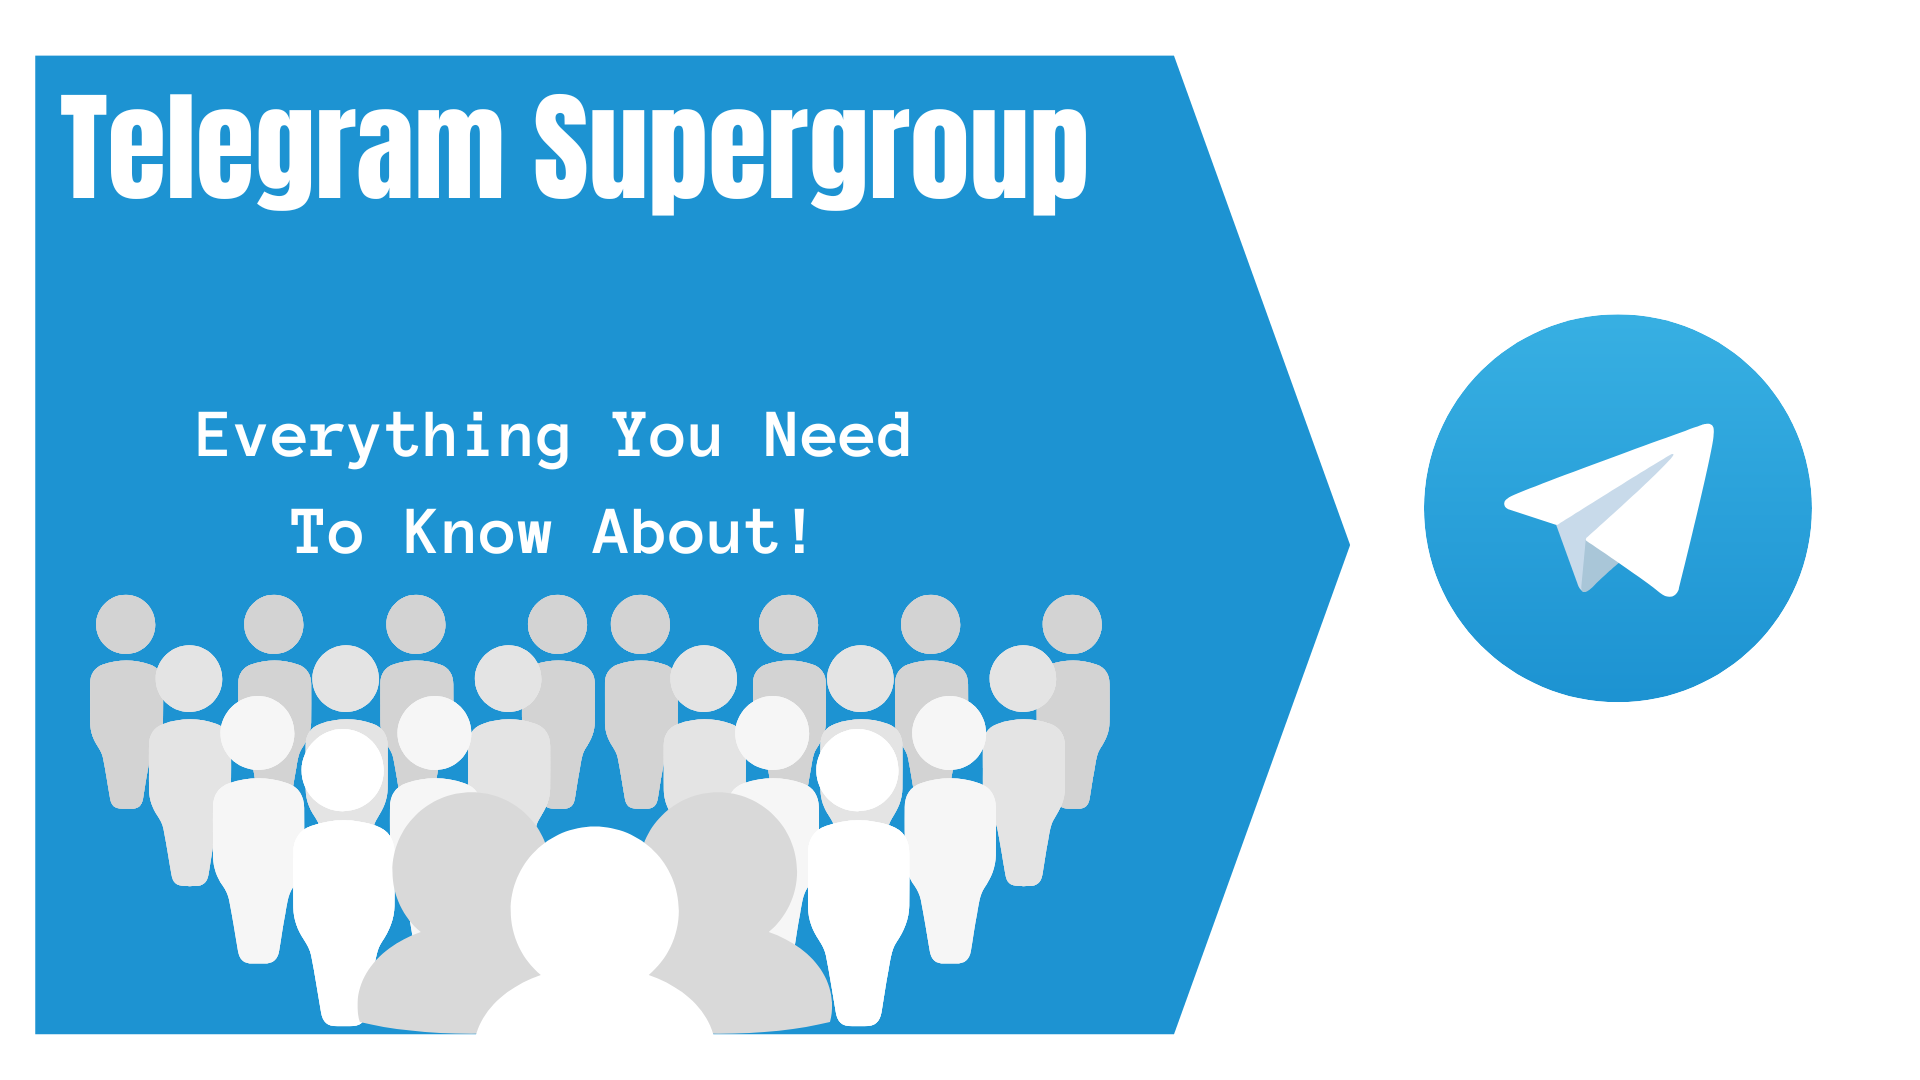 Telegram Supergroup: Everything You Need To Know About